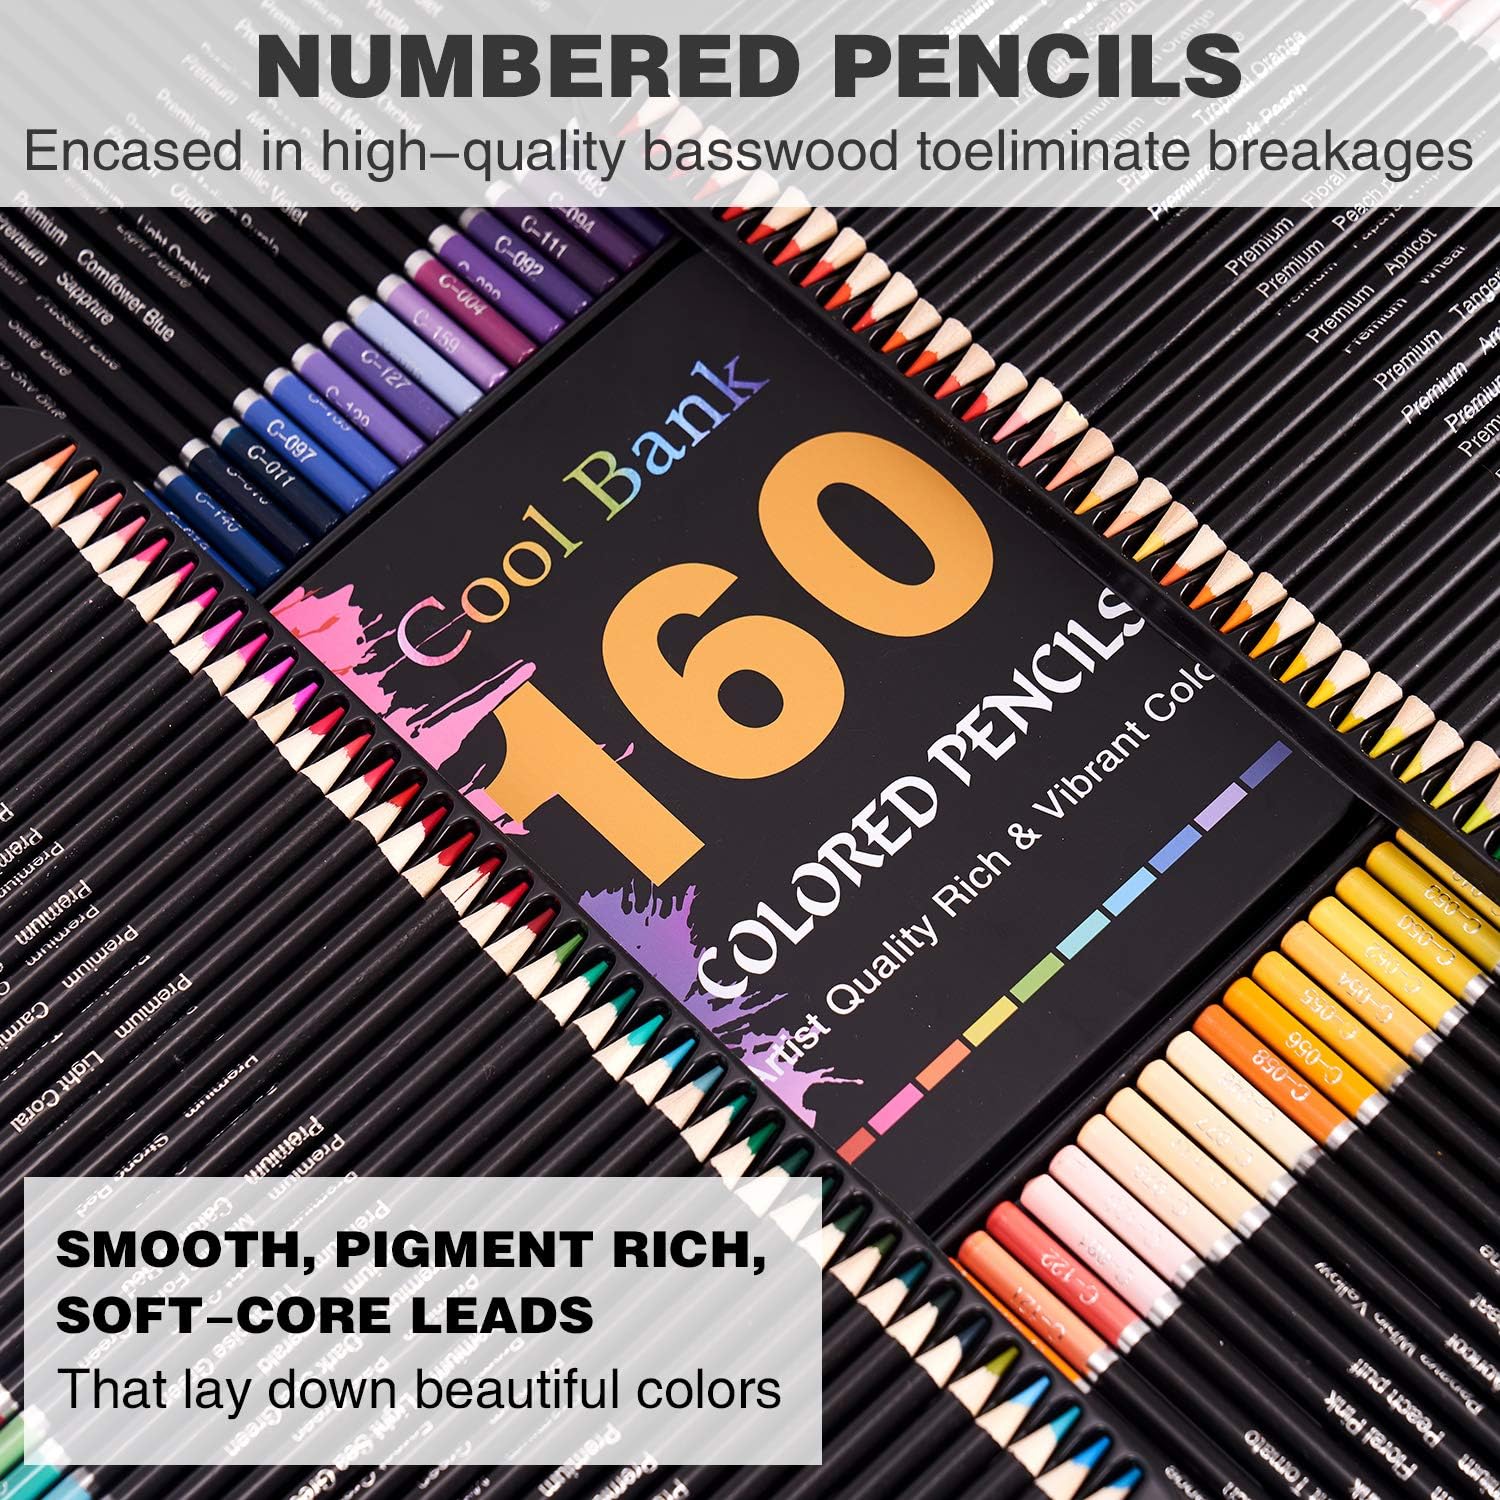 160 Professional Colored Pencils, Artist Pencils Set for Coloring Books, Premium Artist Soft Series Lead with Vibrant Colors for Sketching, Shading & Coloring in Tin Box - image 4 of 7